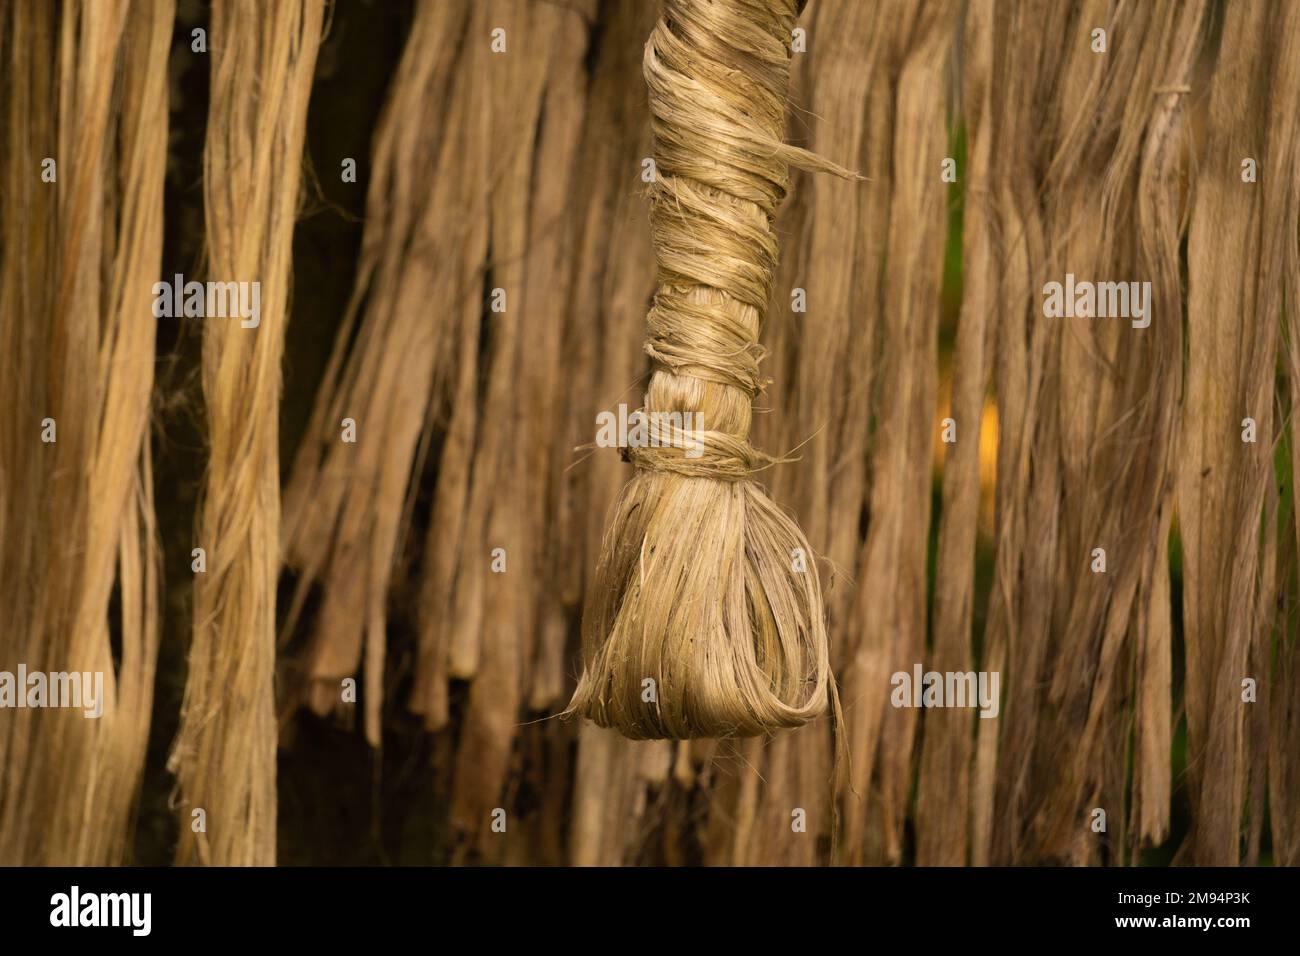 The soaked jute is being dried in the sun. Closeup image of jute. Jute is a type of bast fiber plant. Jute is the main cash crop in Bangladesh. Stock Photo